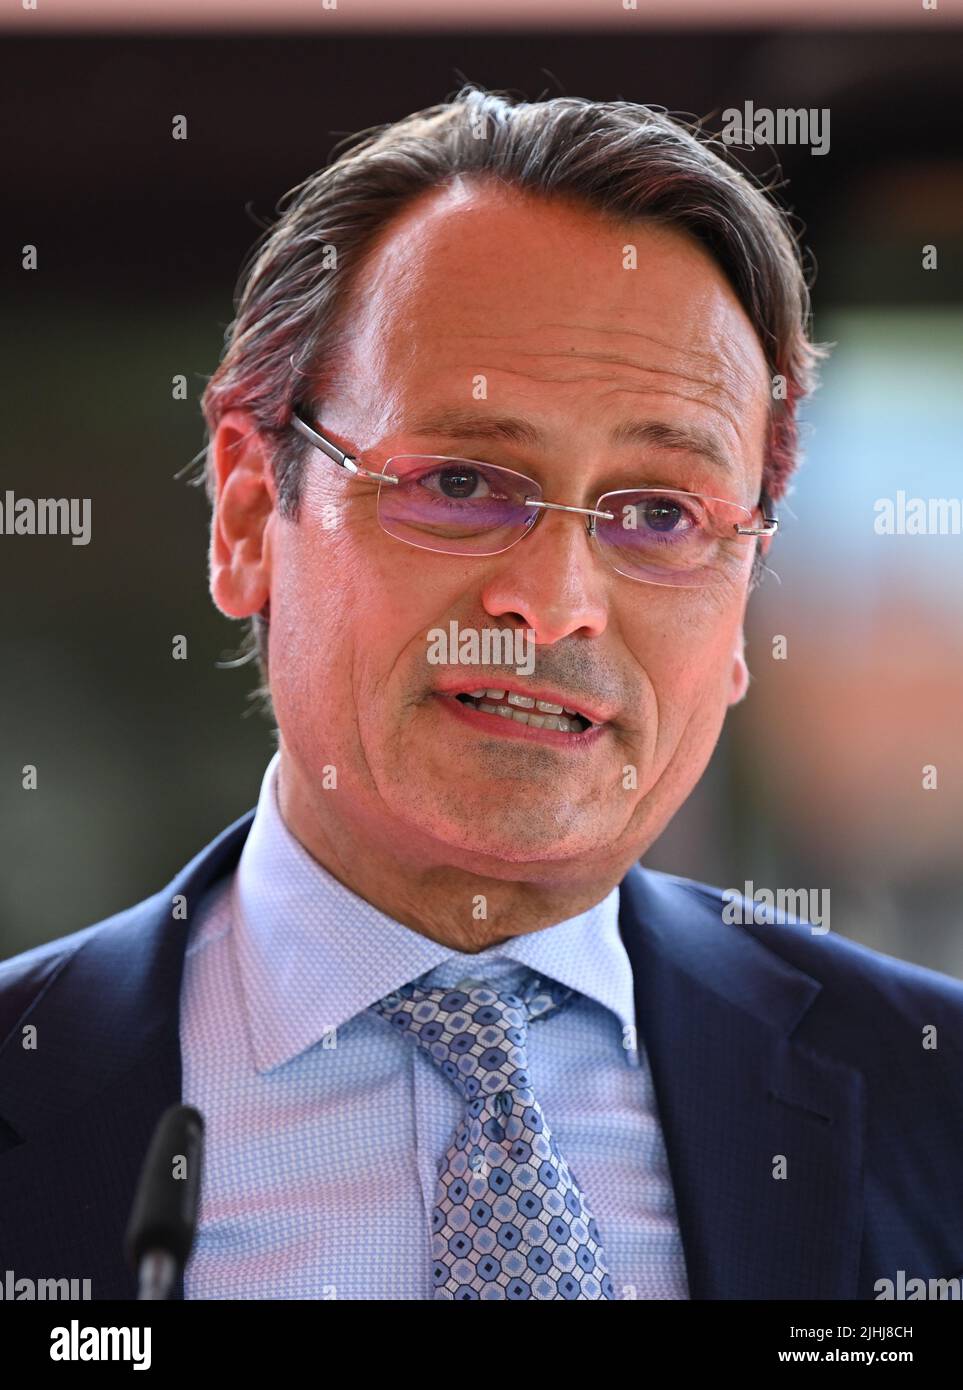 Mainz, Germany. 18th July, 2022. Michael Peterson, DB Board Member for Long-Distance Passenger Transport, attends the train christening ceremony for Deutsche Bahn's 100th ICE 4 at the main station. Credit: Arne Dedert/dpa/Alamy Live News Stock Photo